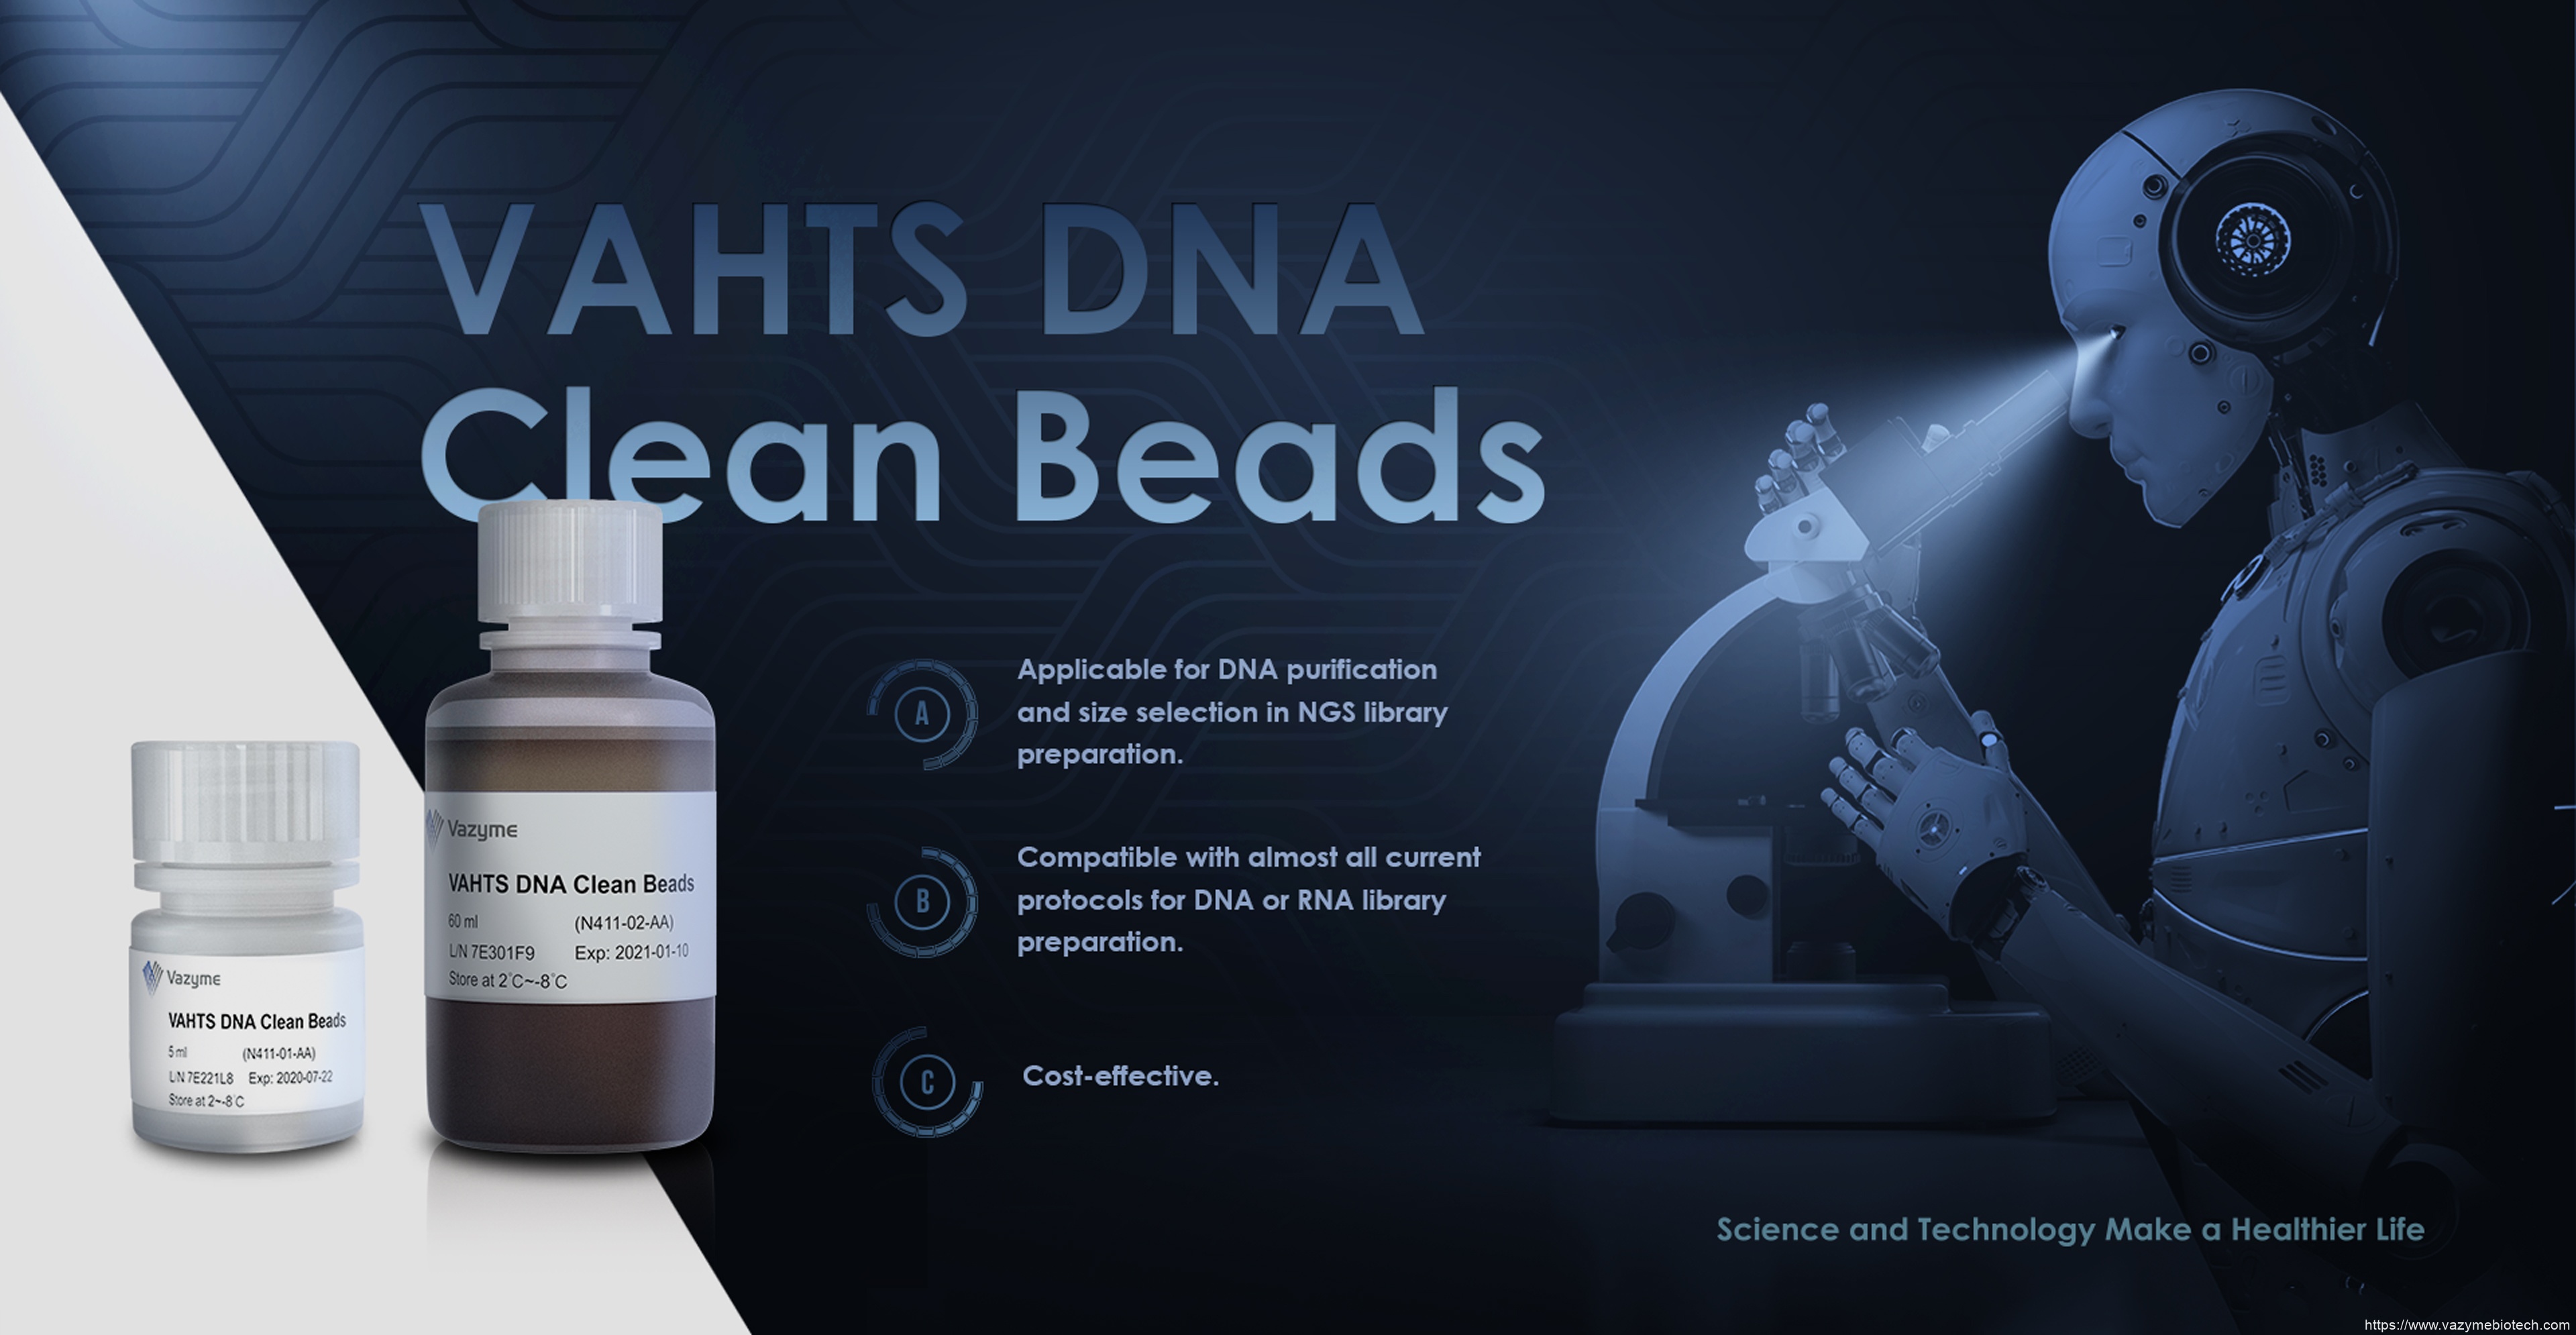 VAHTS DNA Clean Beads